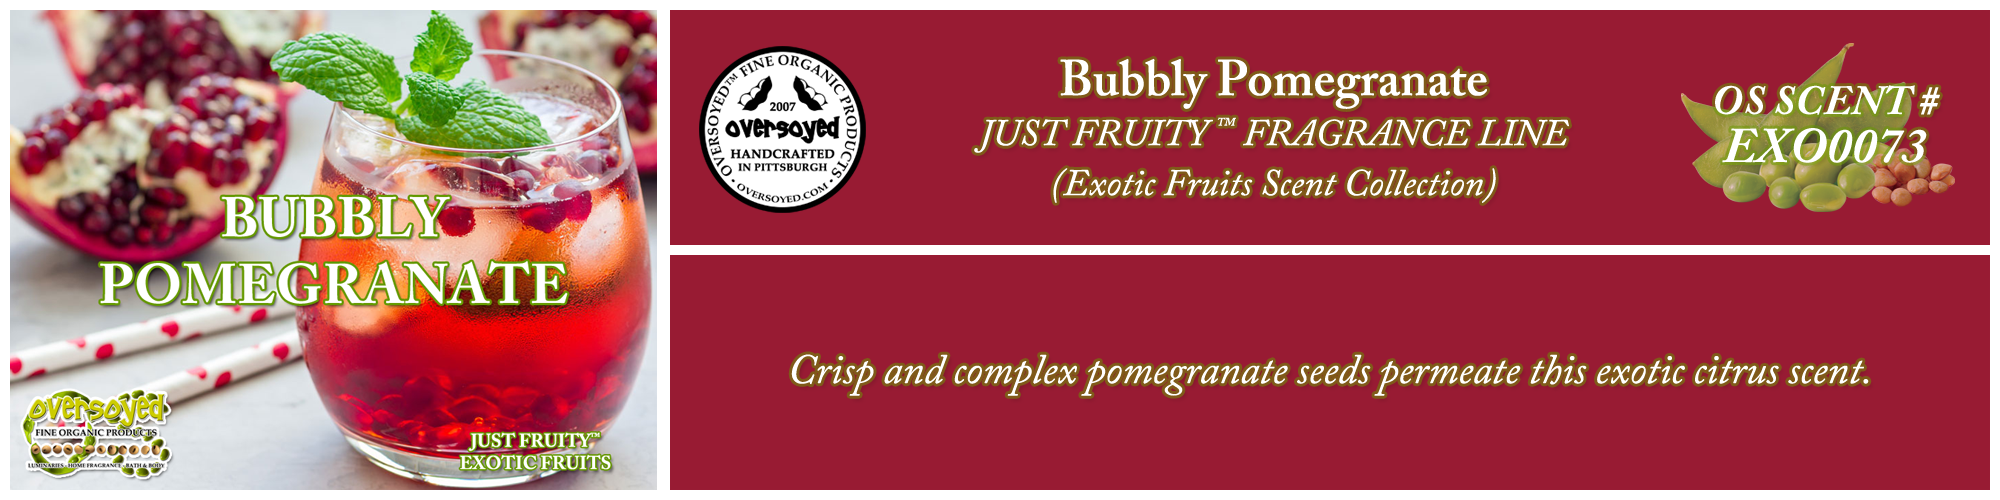 Bubbly Pomegranate Handcrafted Products Collection